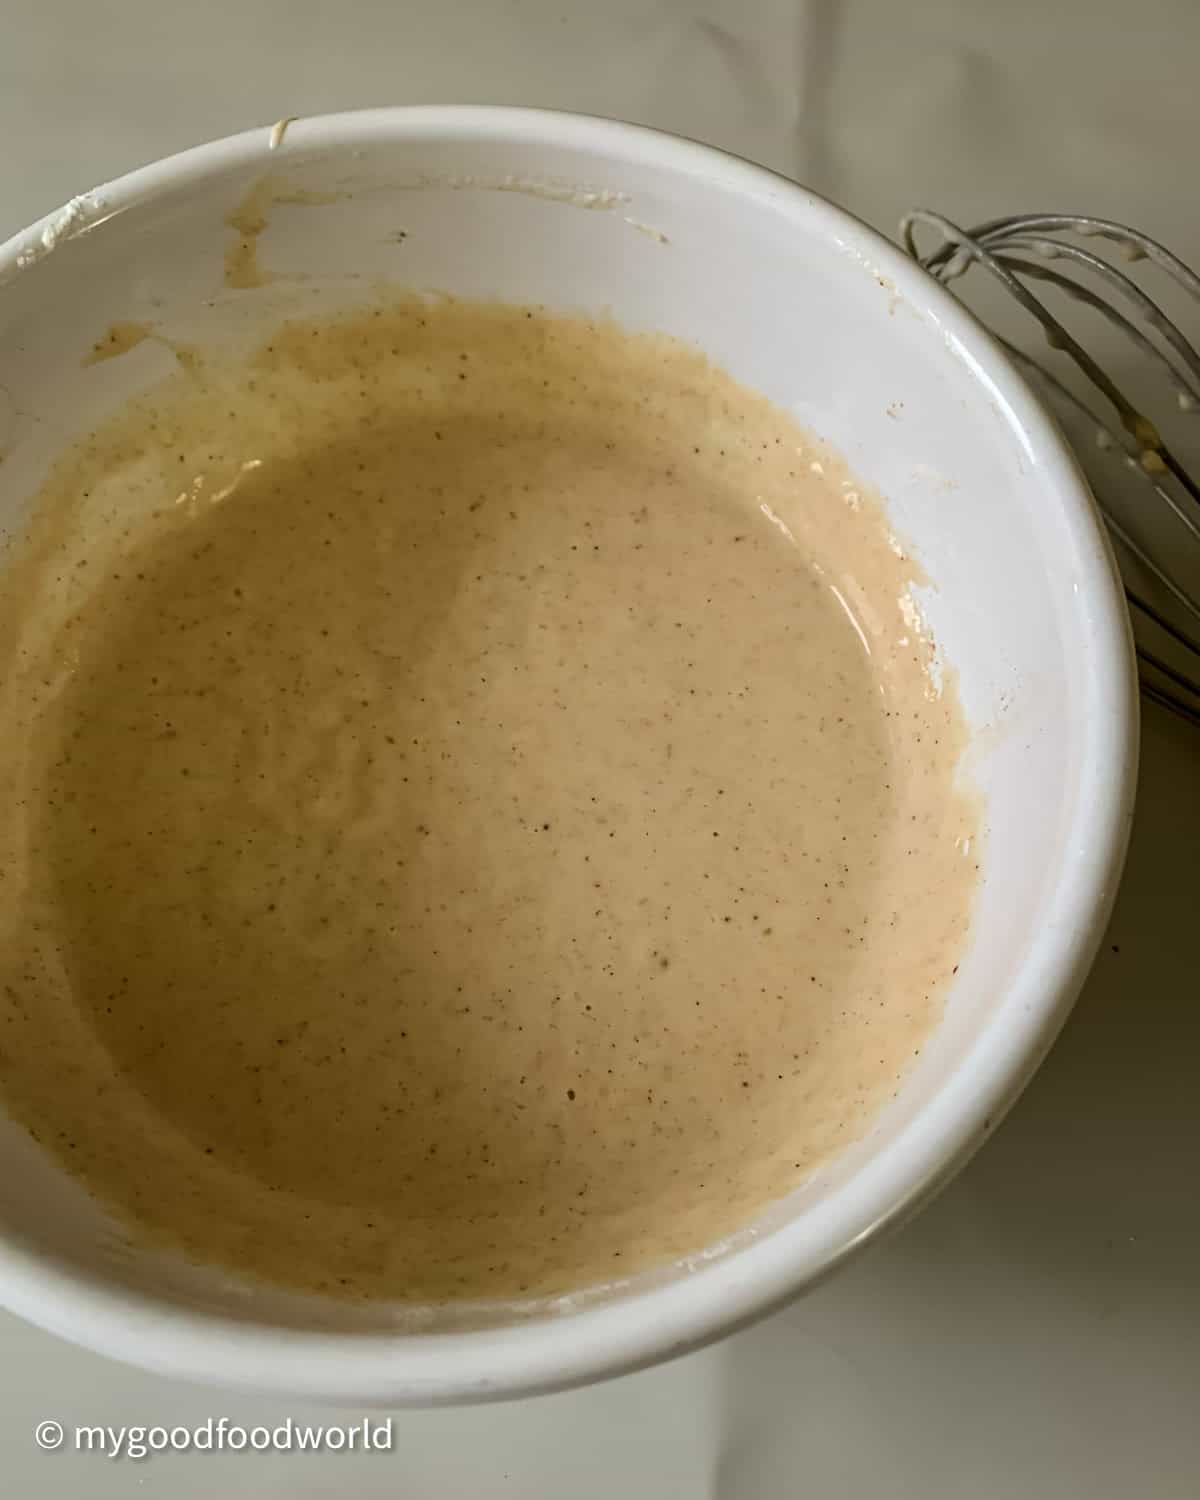 Batter for pancake is placed in a white round bowl. The batter has brown specks in it which looks like cinnamon powder.